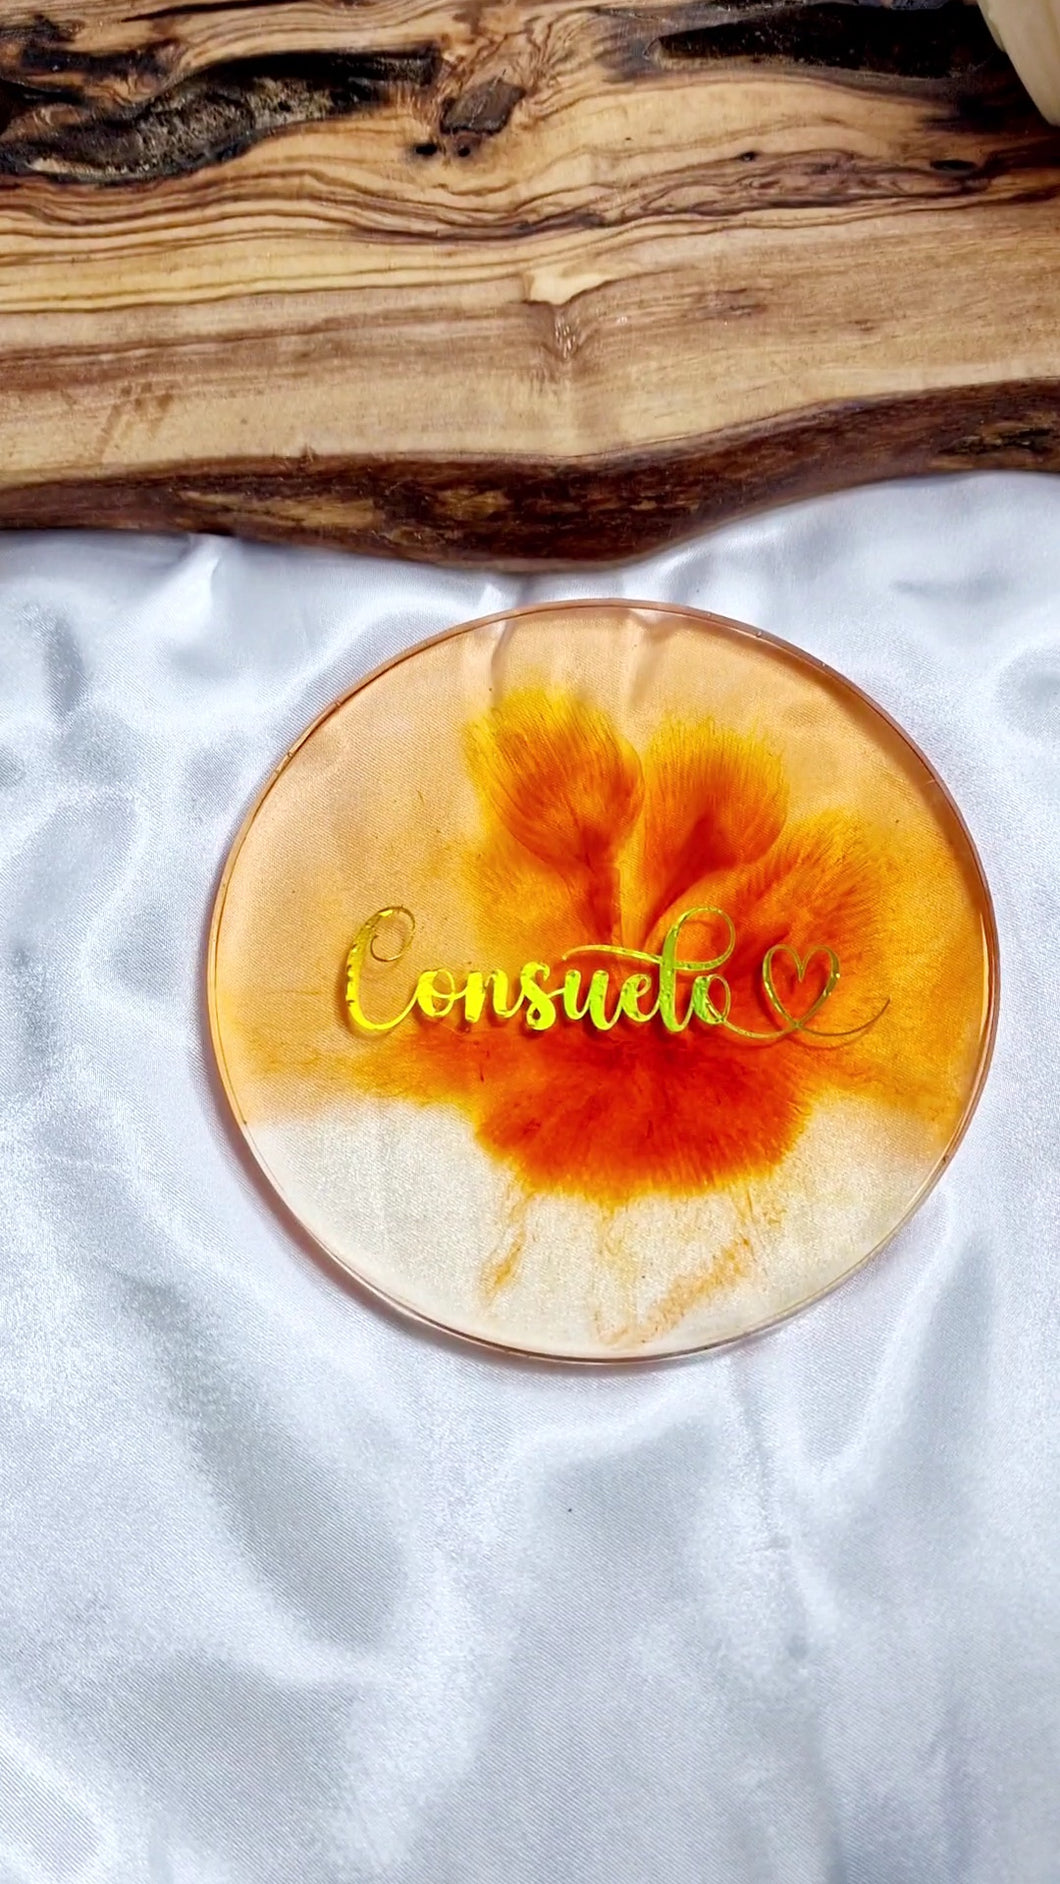 Bespoke Resin Coasters - Customised With Vinyl Decal Names & Unique Designs